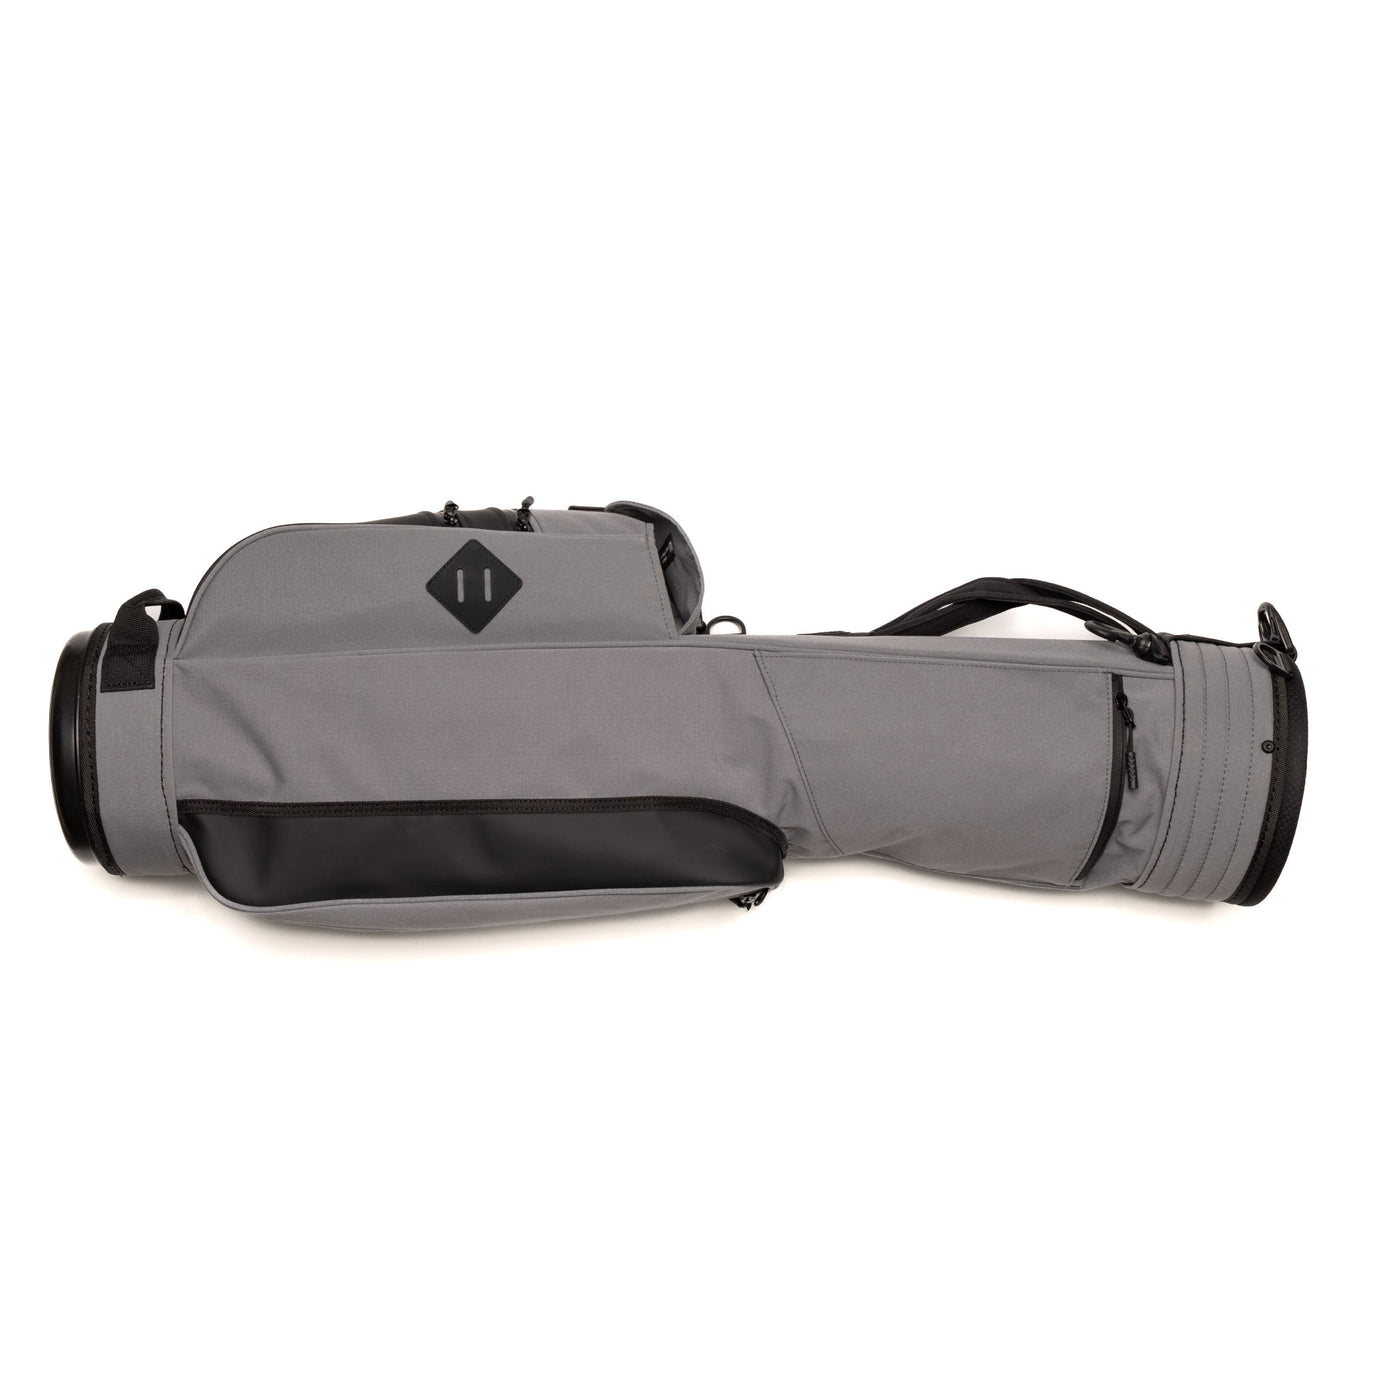 Rover Carry Bag - Charcoal